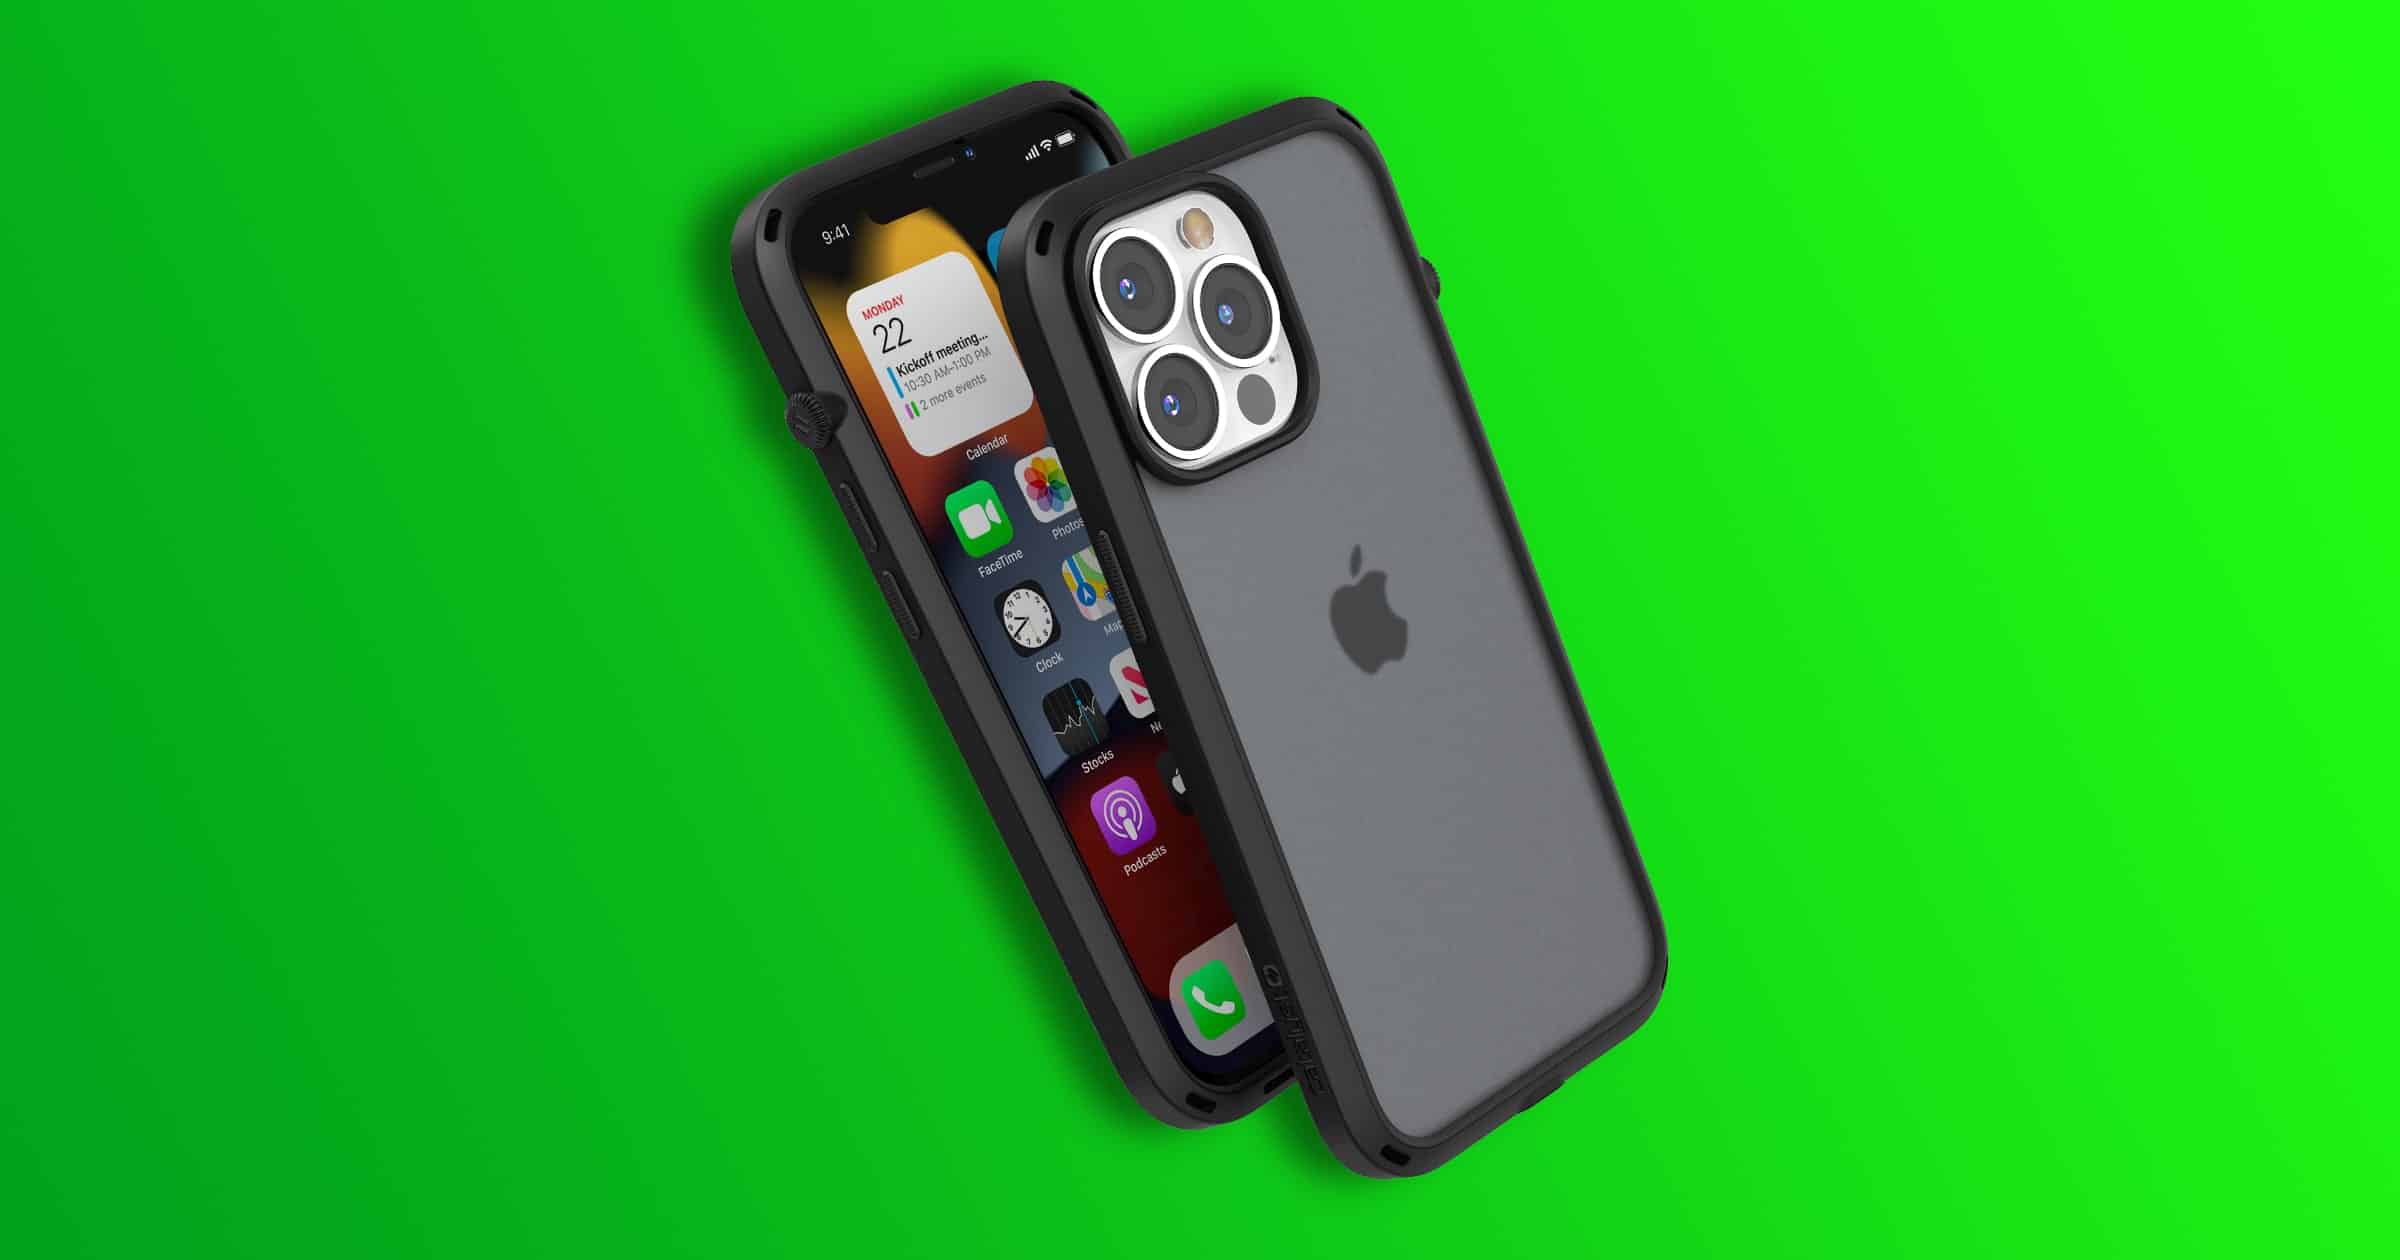 Pepcom 2021: Catalyst Announces Waterproof Cases for iPhone, AirPods